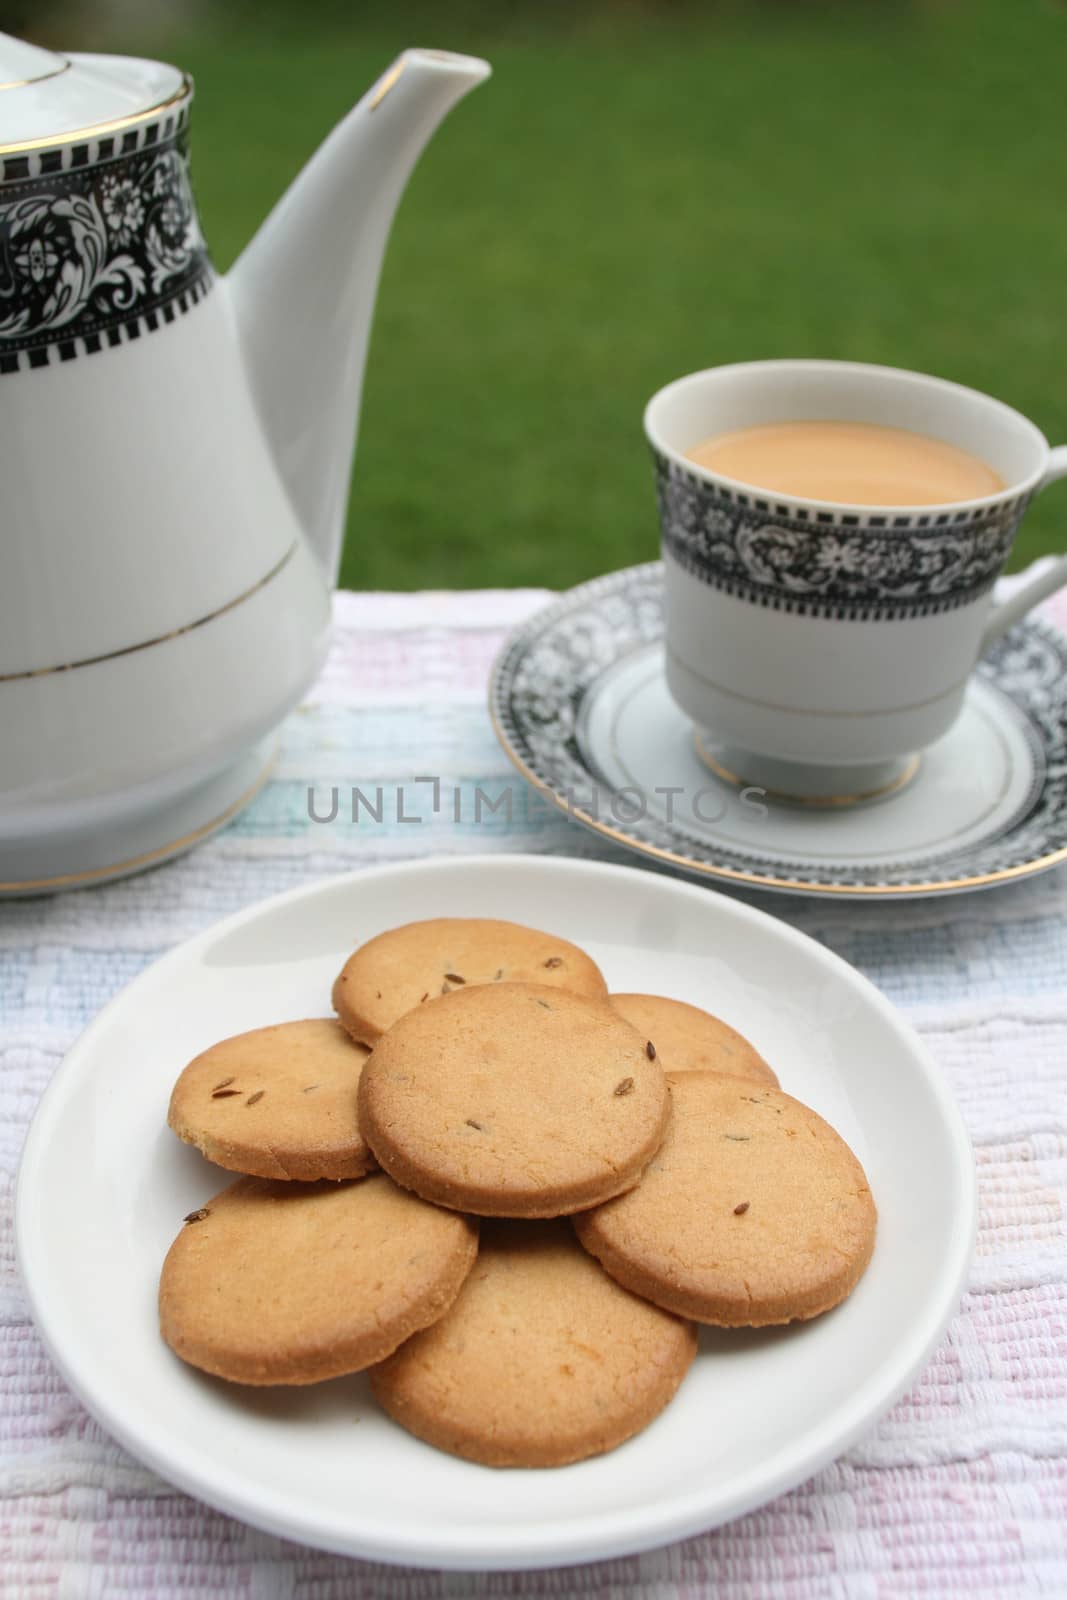 Plate full of biscuits served with tea pot and a cup